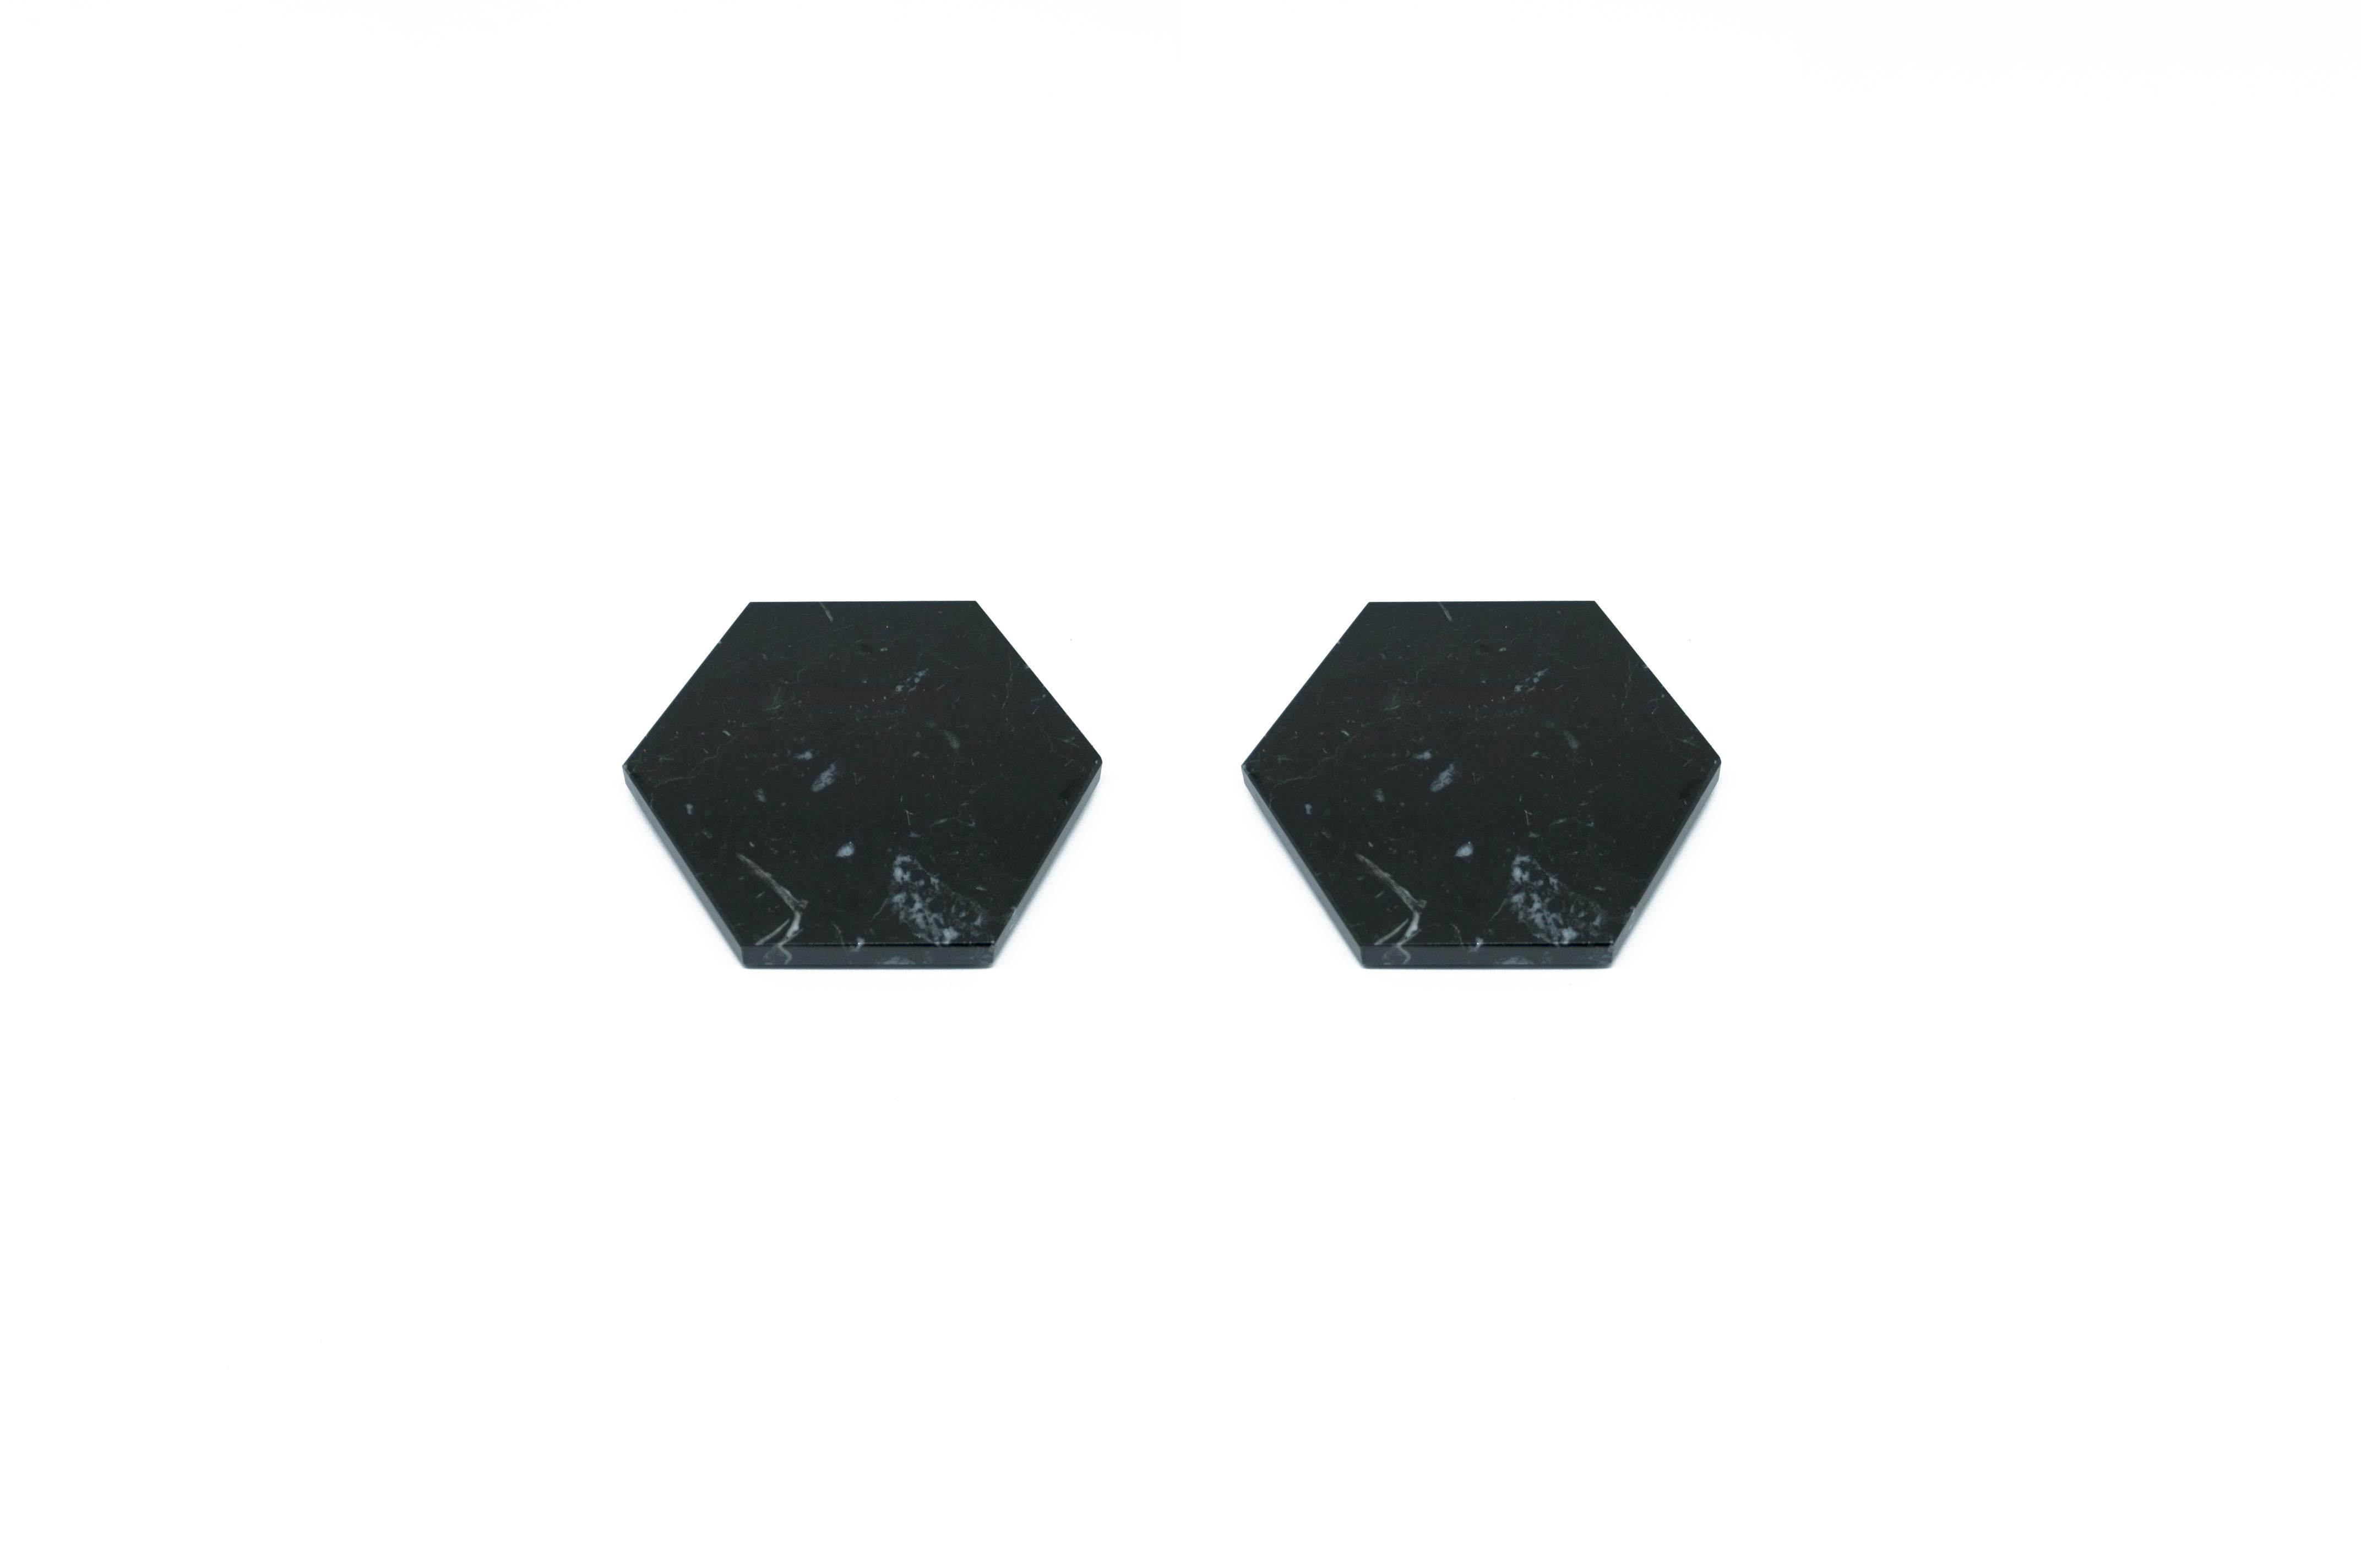 Set of 2 hexagonal shape black Marquina marble coasters with cork underneath. Each piece is in a way unique (every marble block is different in veins and shades) and handmade by Italian artisans specialized over generations in processing marble.